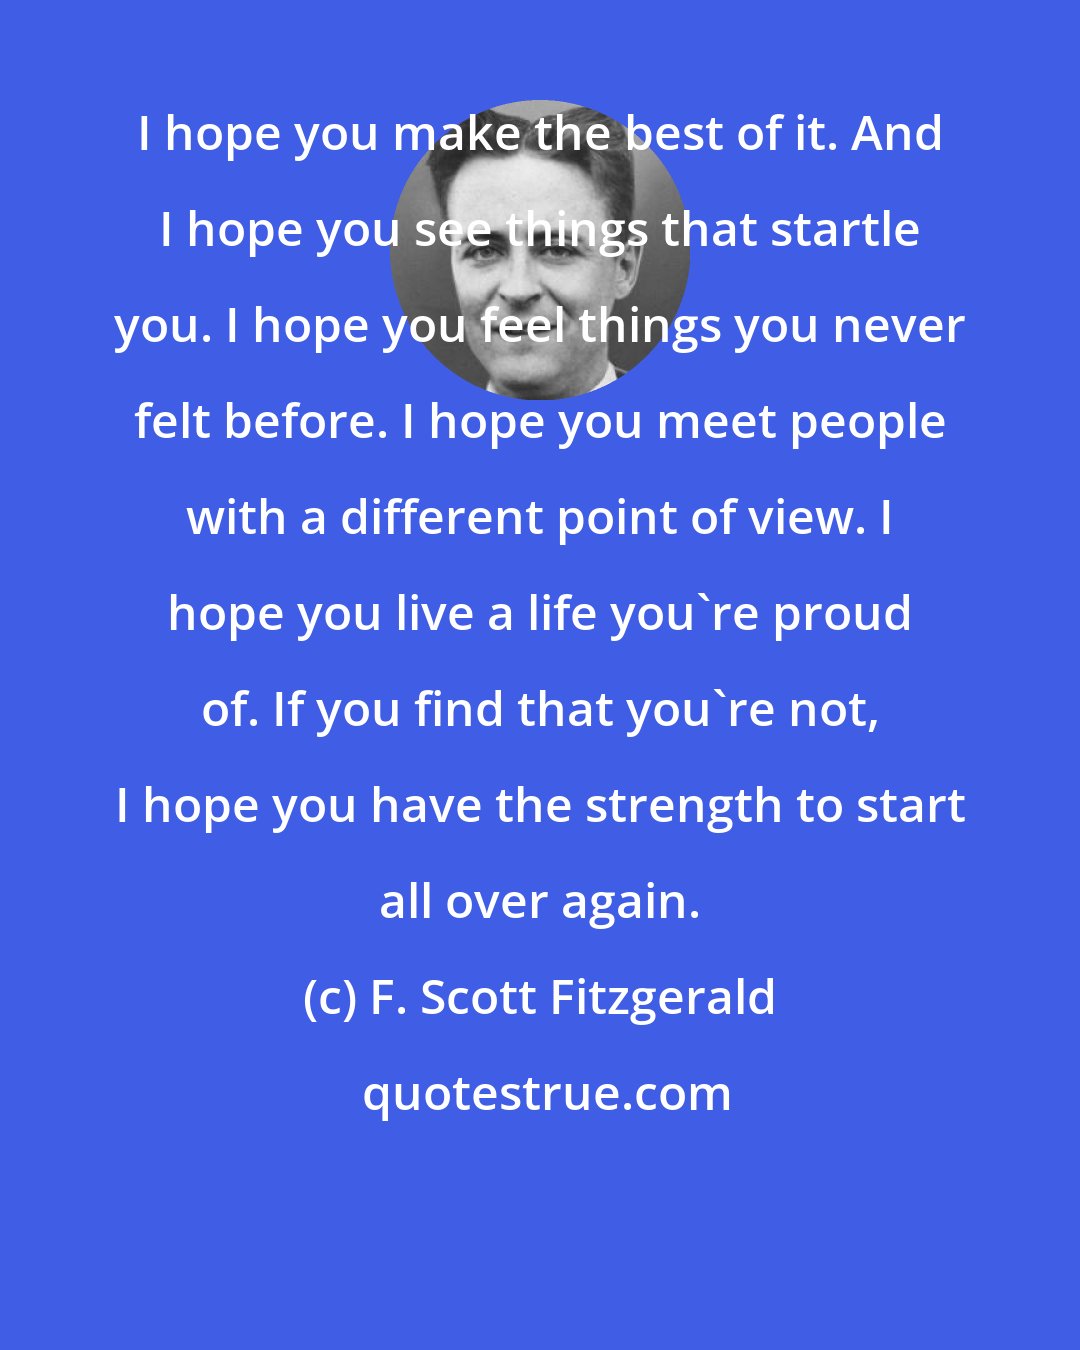 F. Scott Fitzgerald: I hope you make the best of it. And I hope you see things that startle you. I hope you feel things you never felt before. I hope you meet people with a different point of view. I hope you live a life you're proud of. If you find that you're not, I hope you have the strength to start all over again.